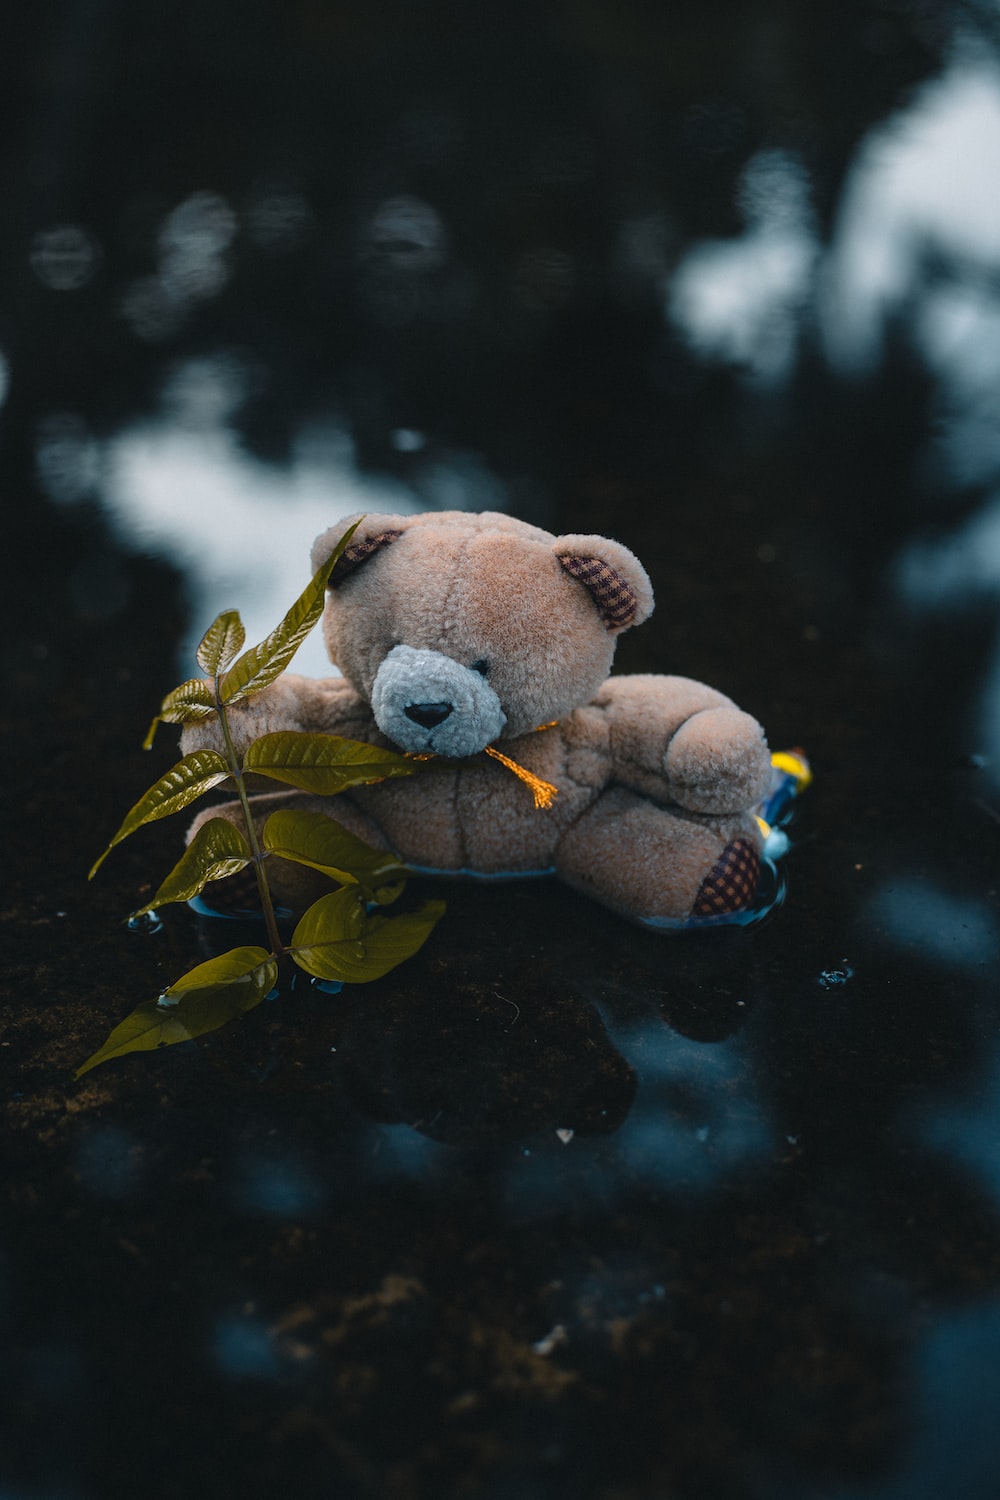 A stuffed animal is floating in the water - Teddy bear